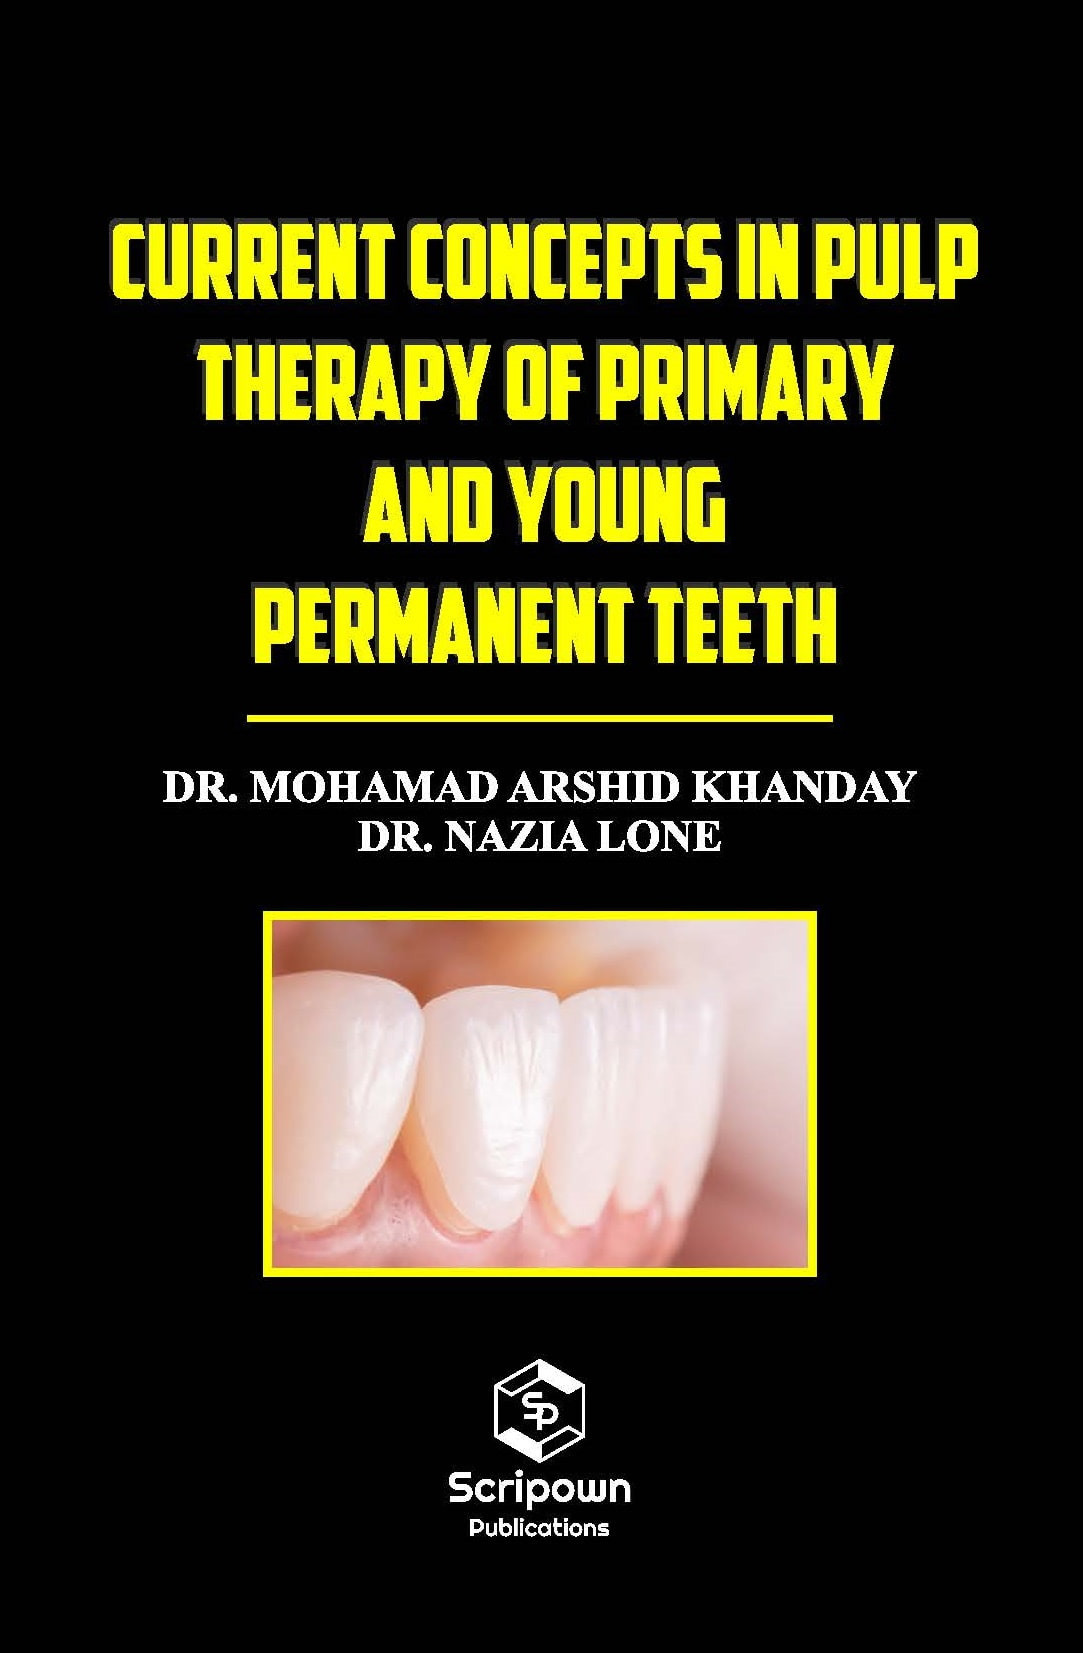 Current Concepts in Pulp Therapy of Primary and Young Permanent Teeth